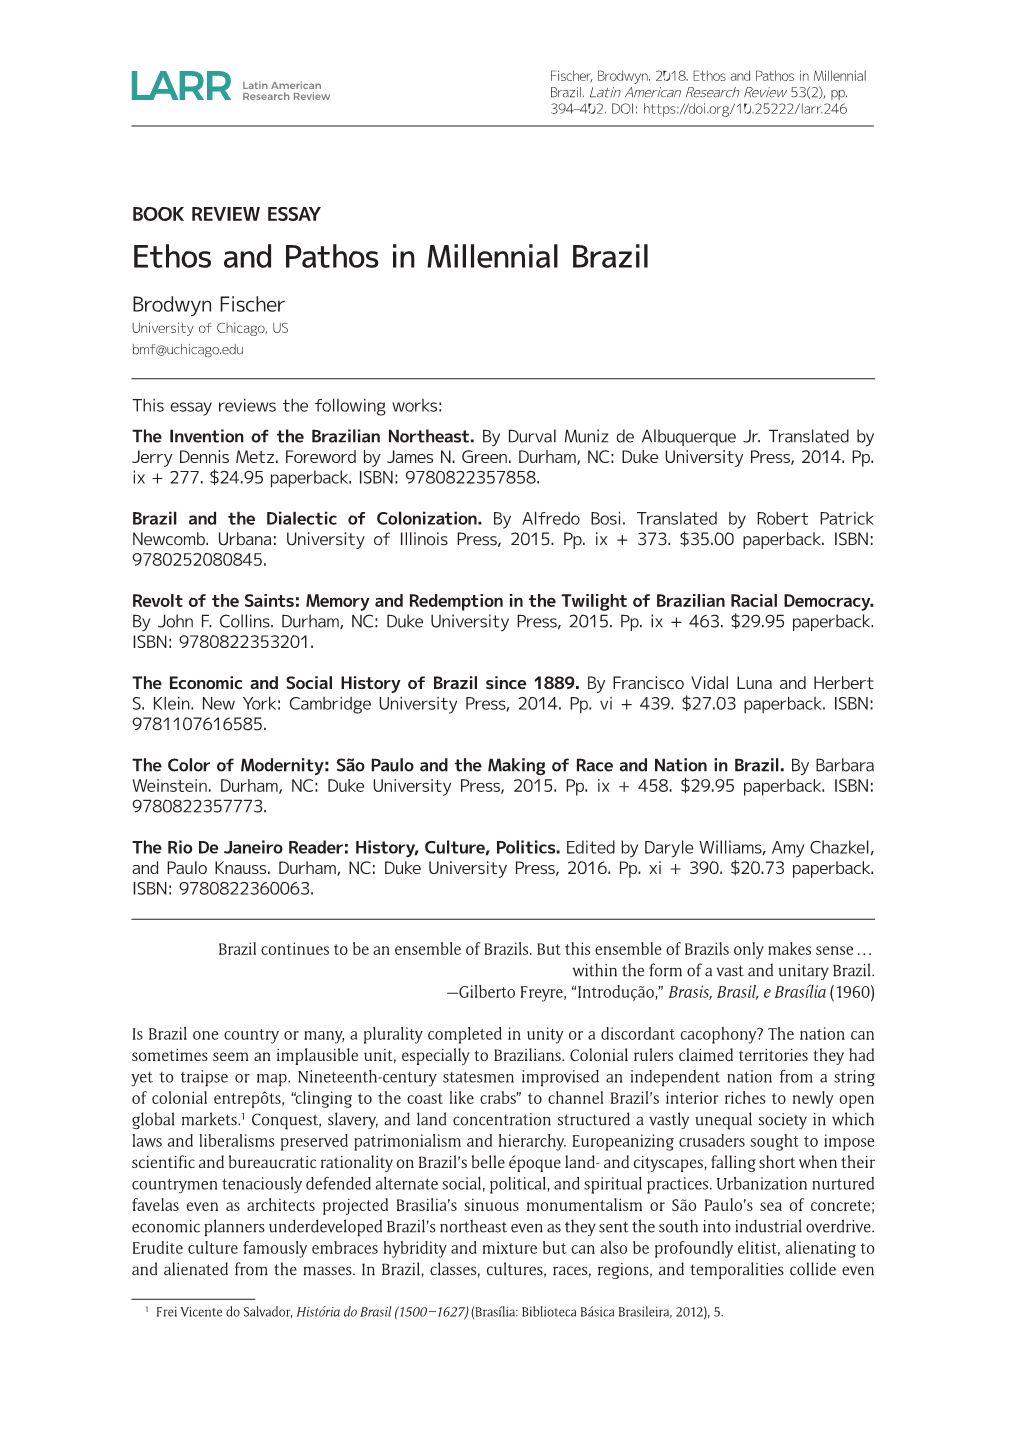 Ethos and Pathos in Millennial Brazil